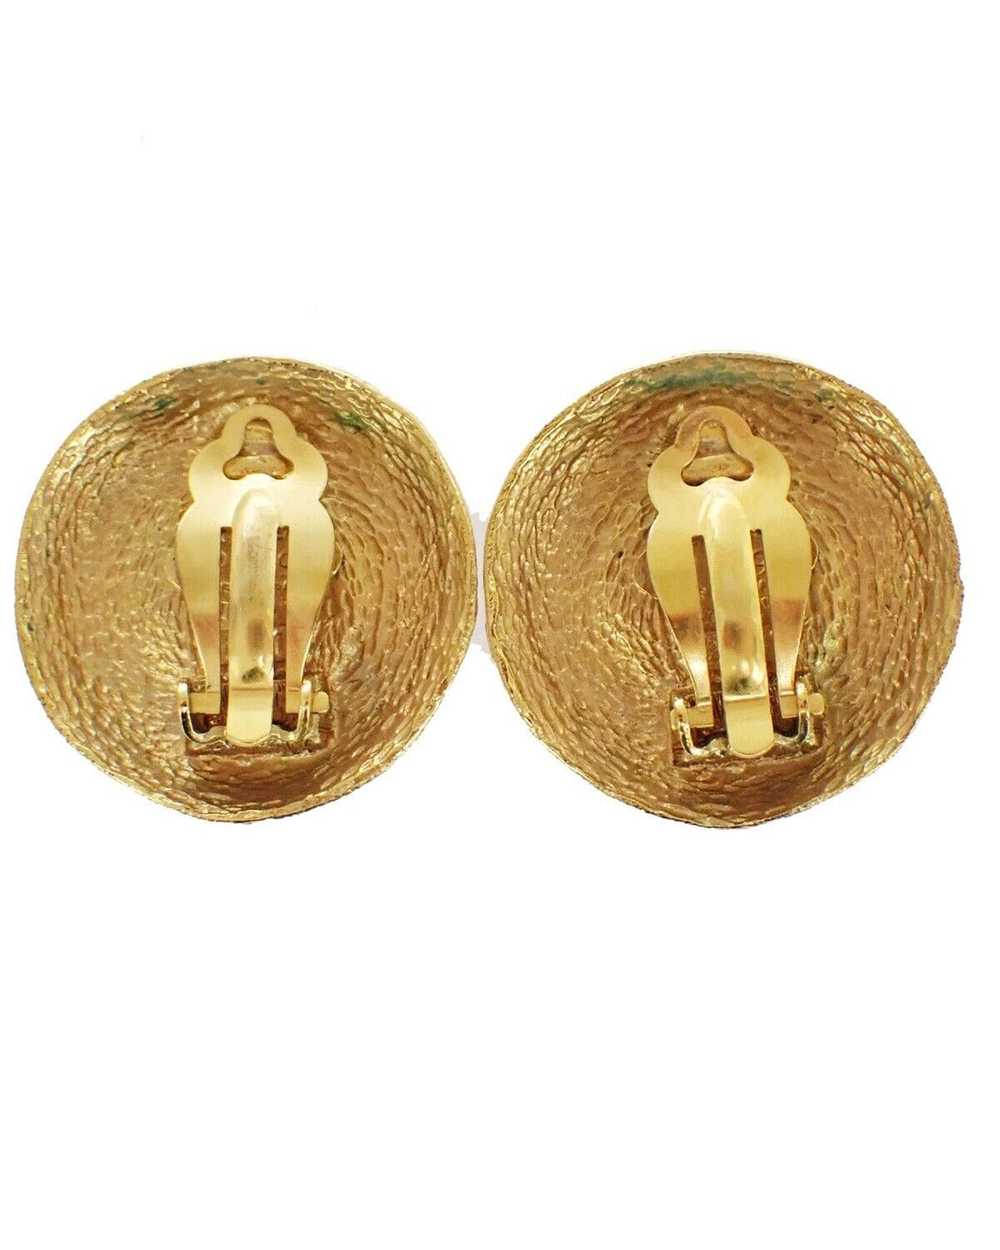 Chanel Coco Mark Button Earrings - image 7